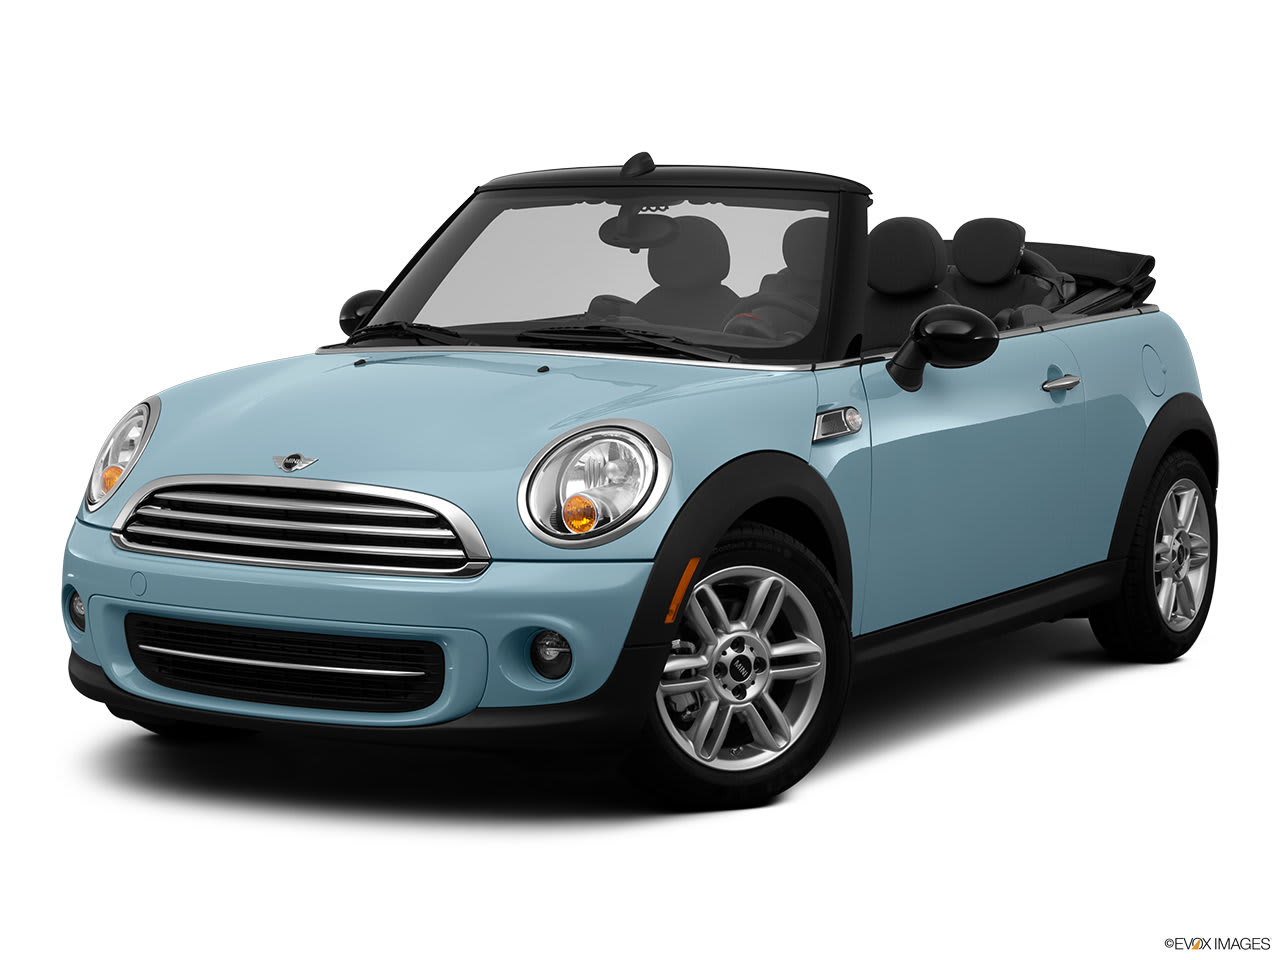 A Buyer’s Guide to the 2012 Mini Cooper Convertible | YourMechanic Advice